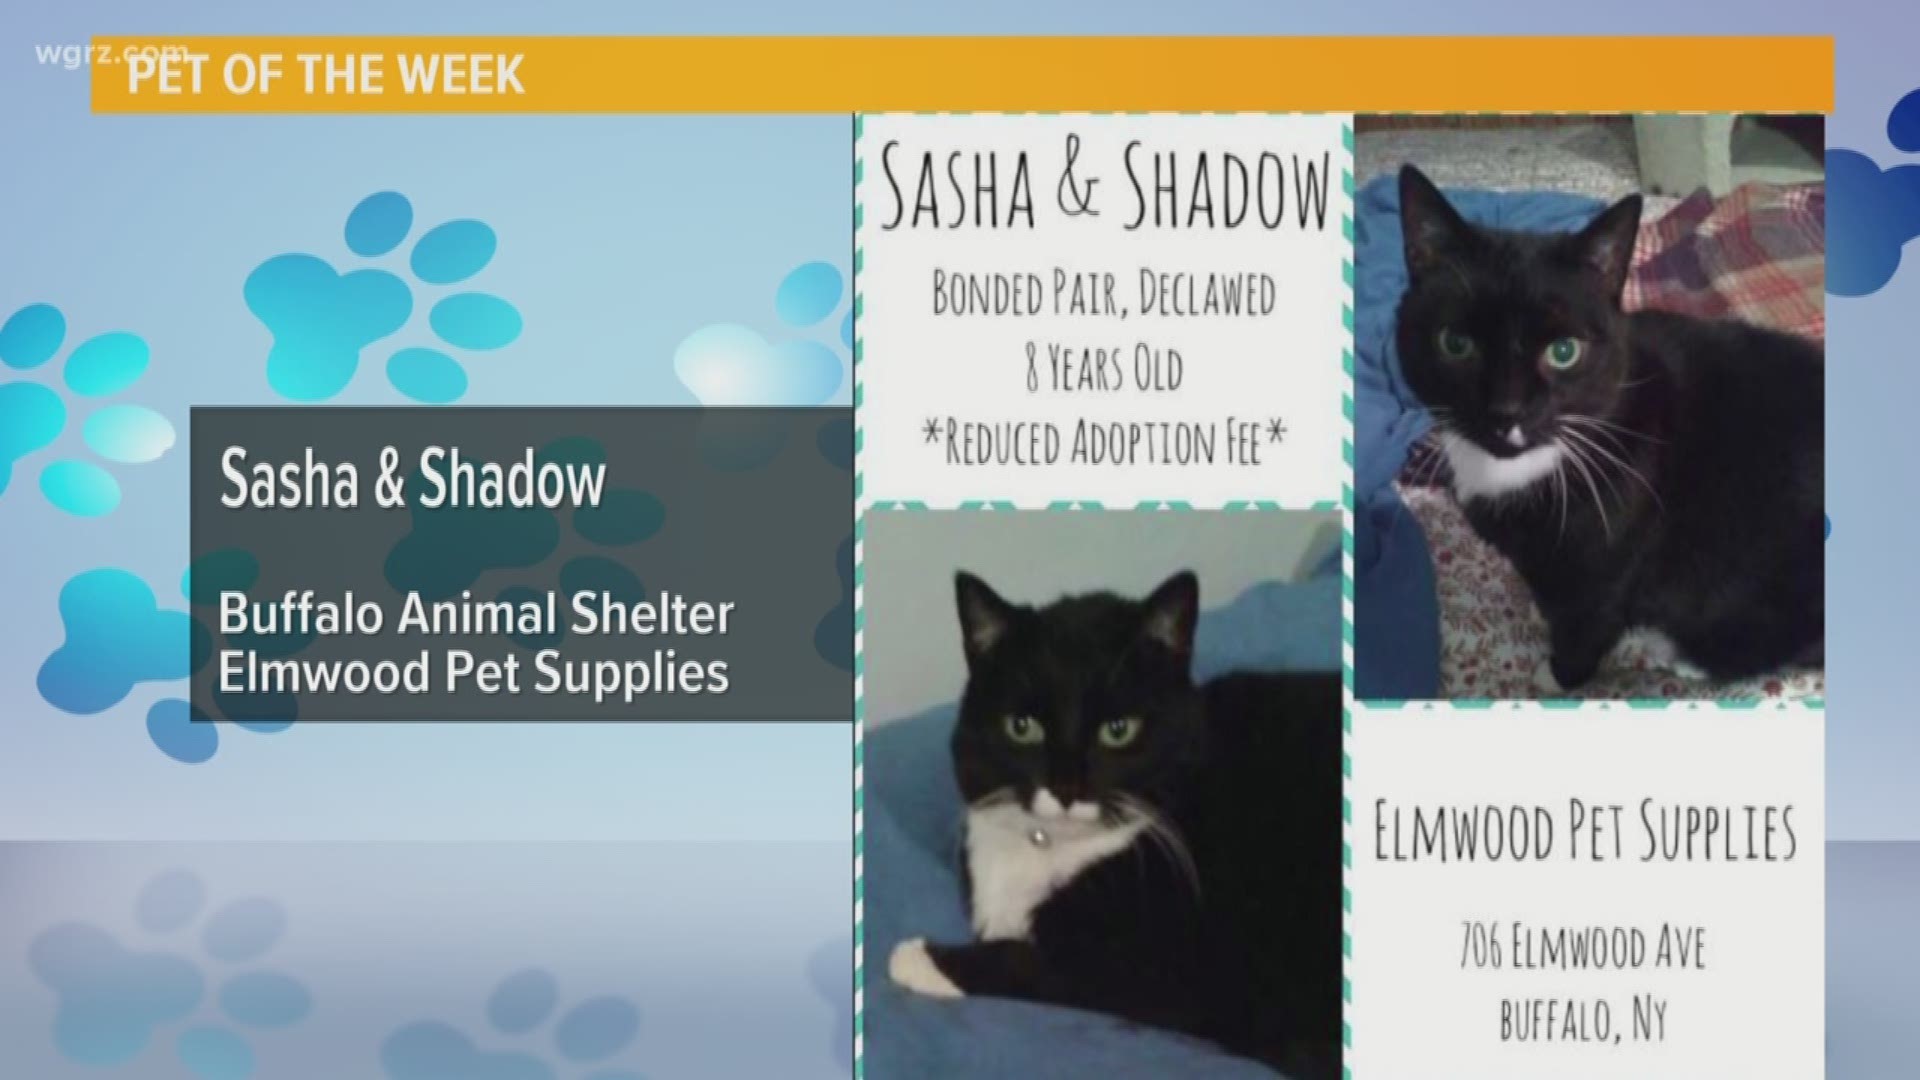 Sasha and Shadow are a bonded pair who stopped by Daybreak to find their furrever home!